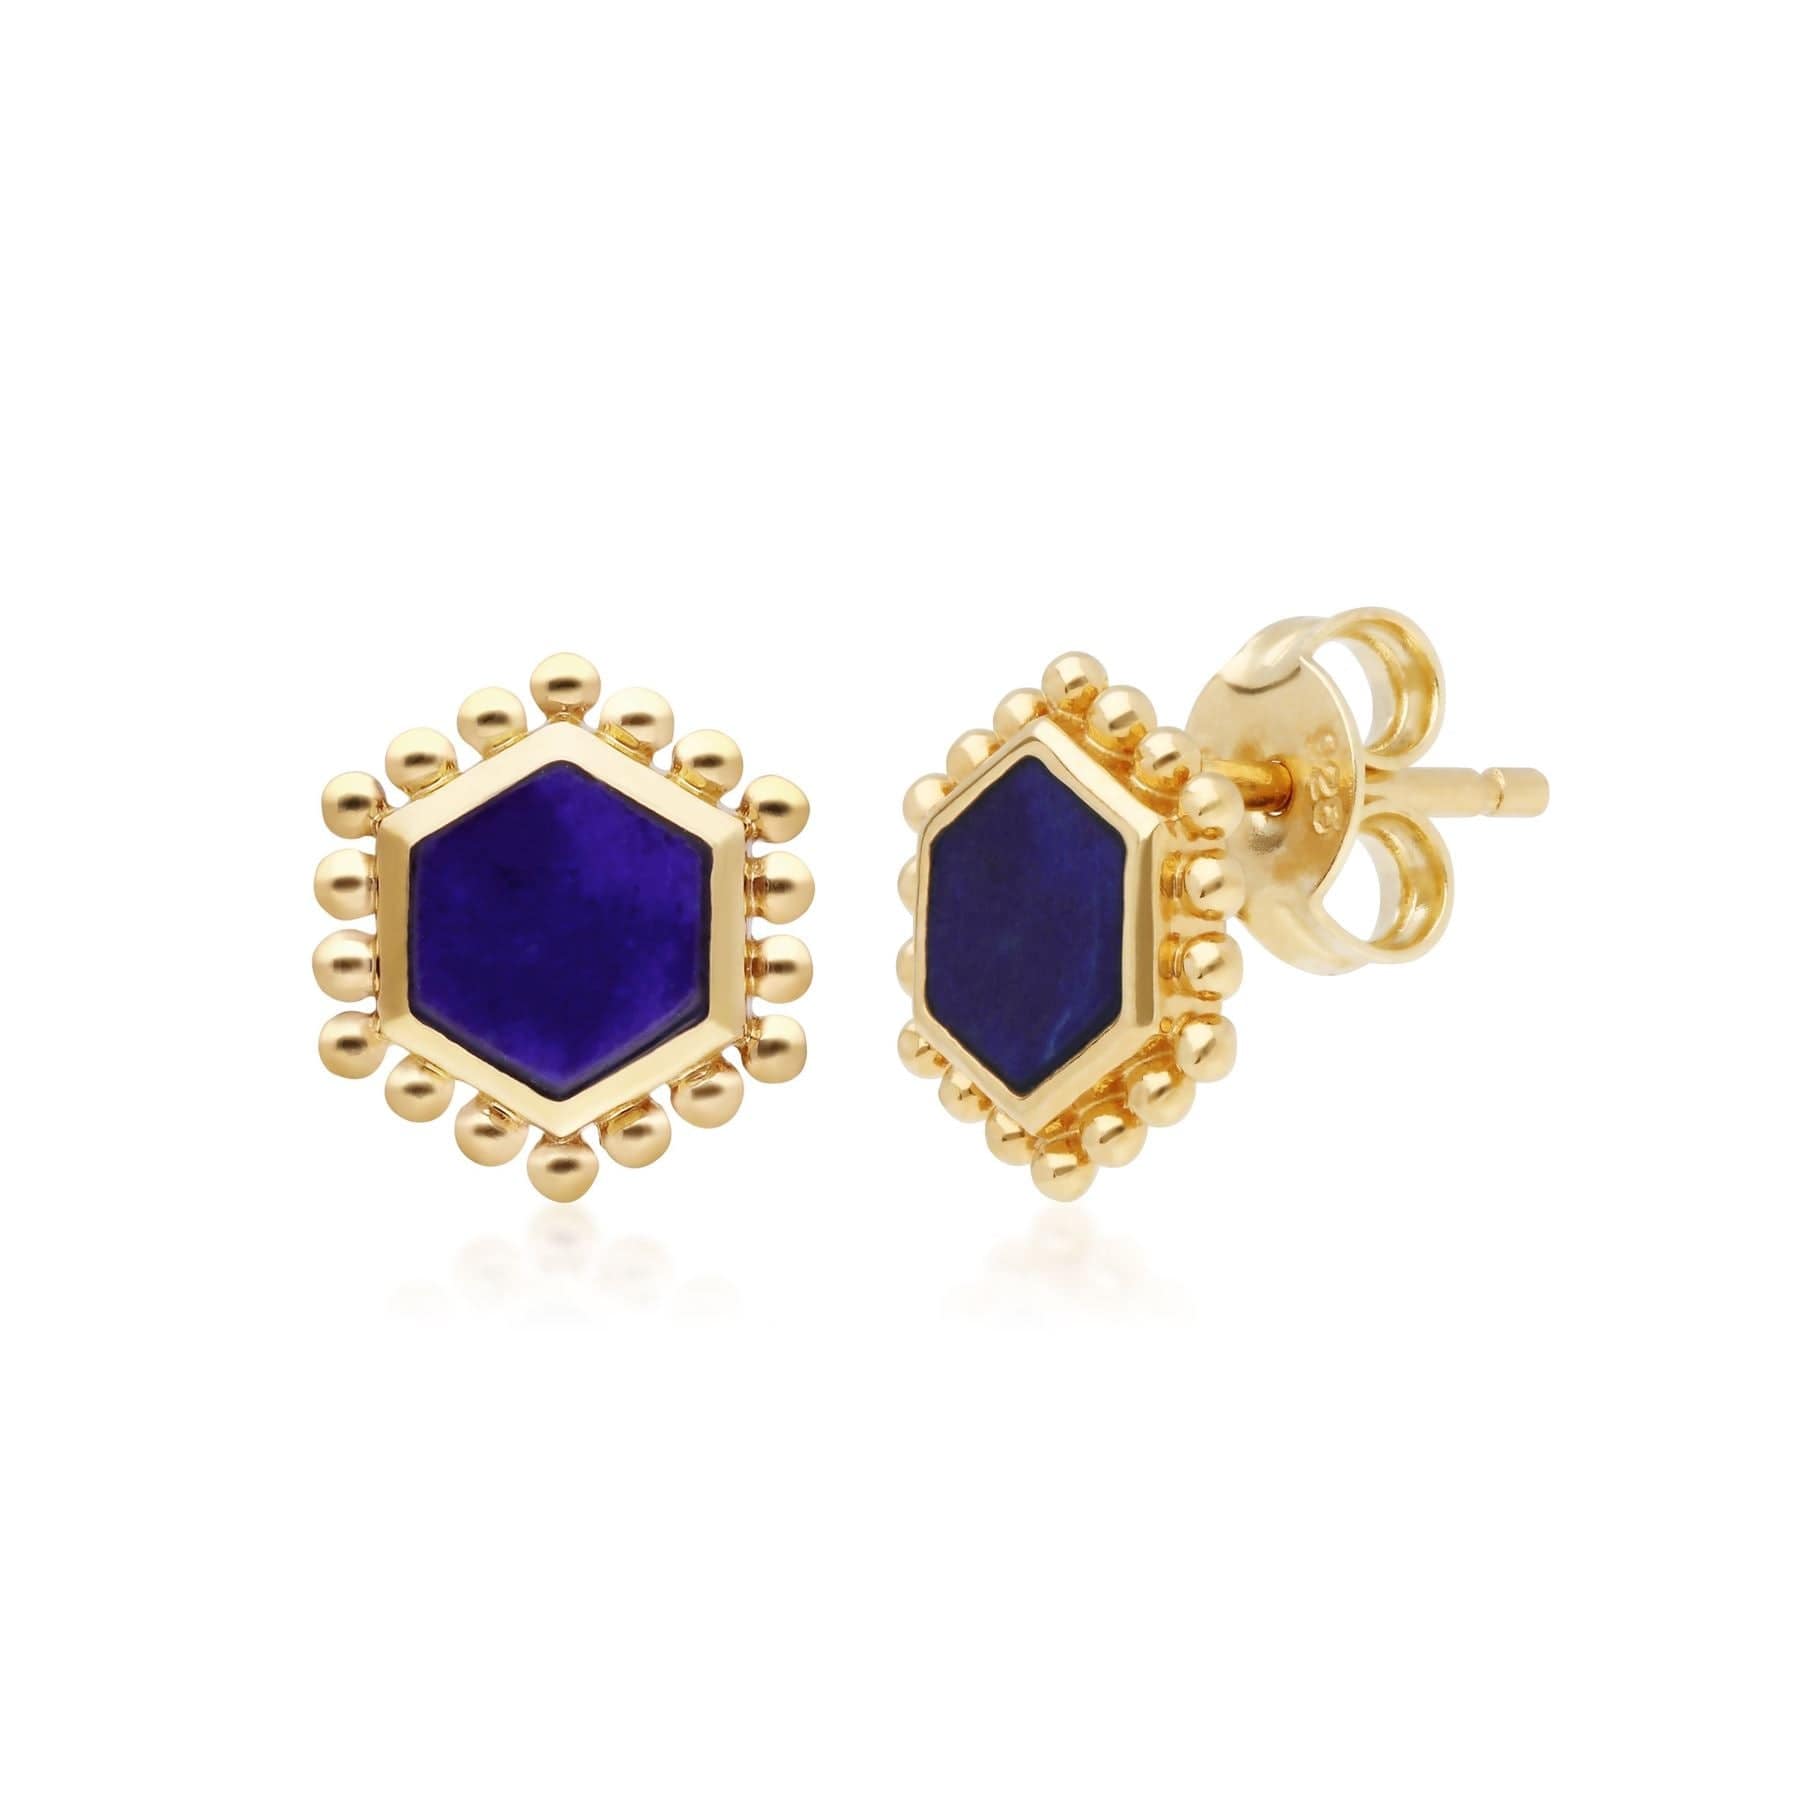 Image of Lapis Lazuli Slice Stud Earrings in Yellow Gold Plated Sterling Silver